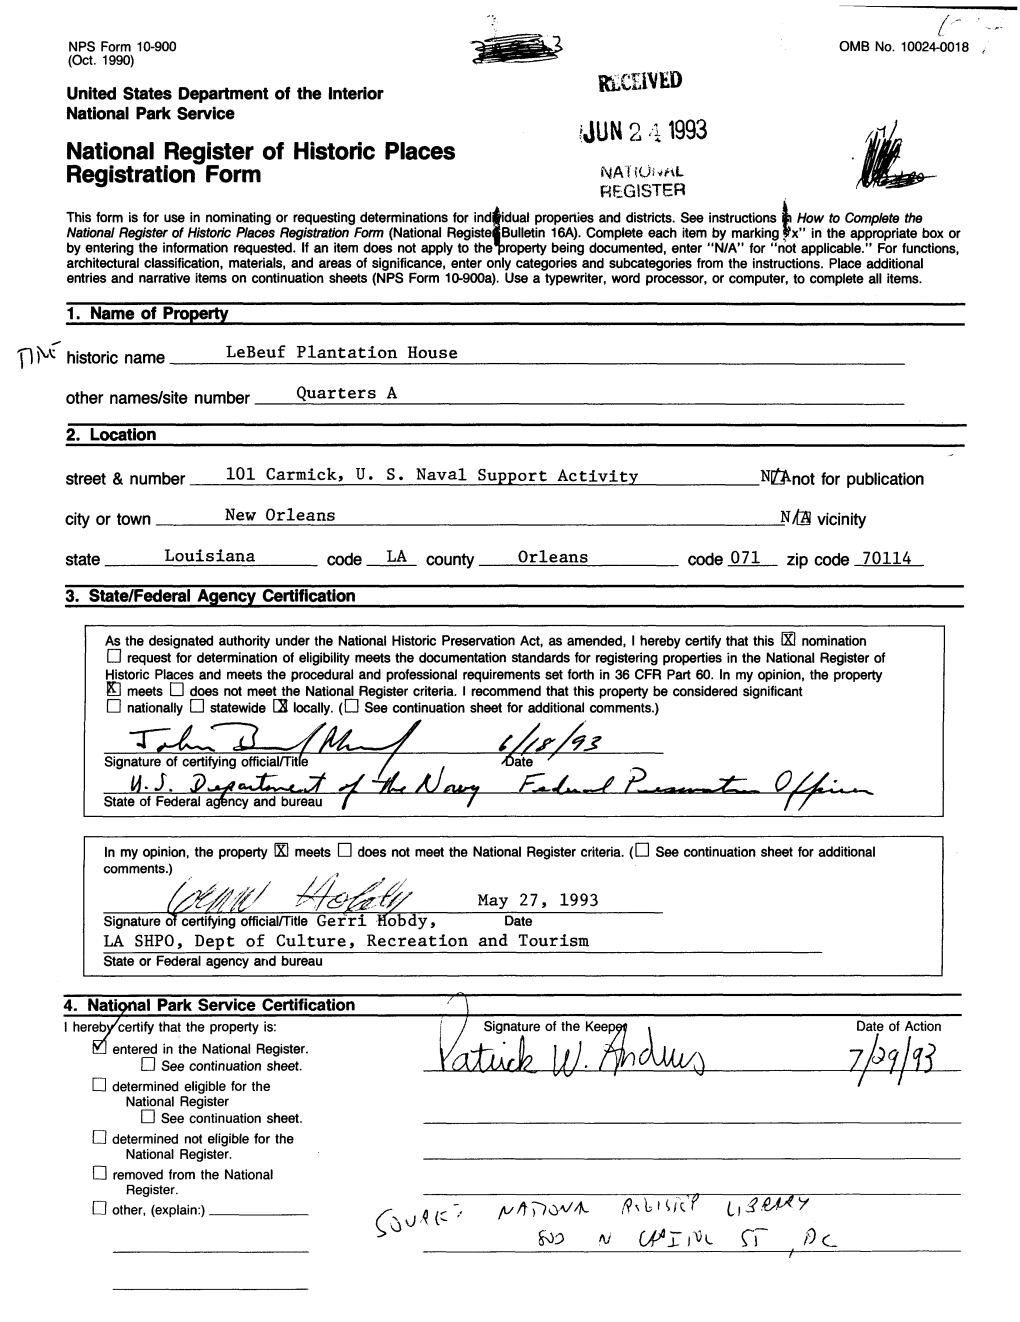 National Register of Historic Places Registration Form REGISTER This Form Is for Use in Nominating Or Requesting Determinations for Ind$Idual Properties and Districts